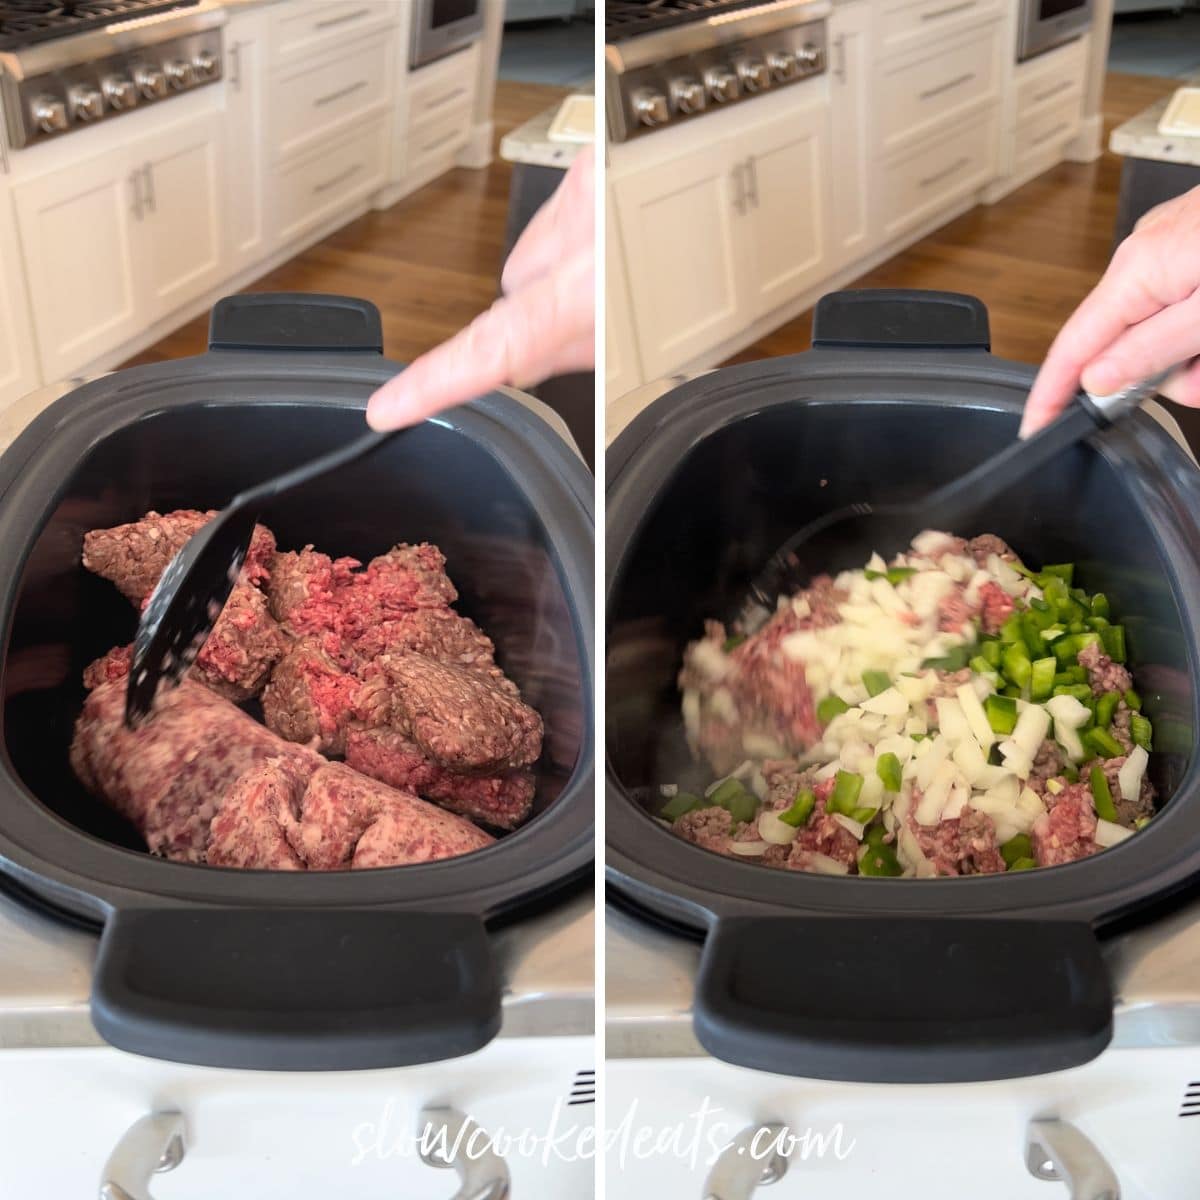 cooking the meat and vegetables in an oval black crock pot.